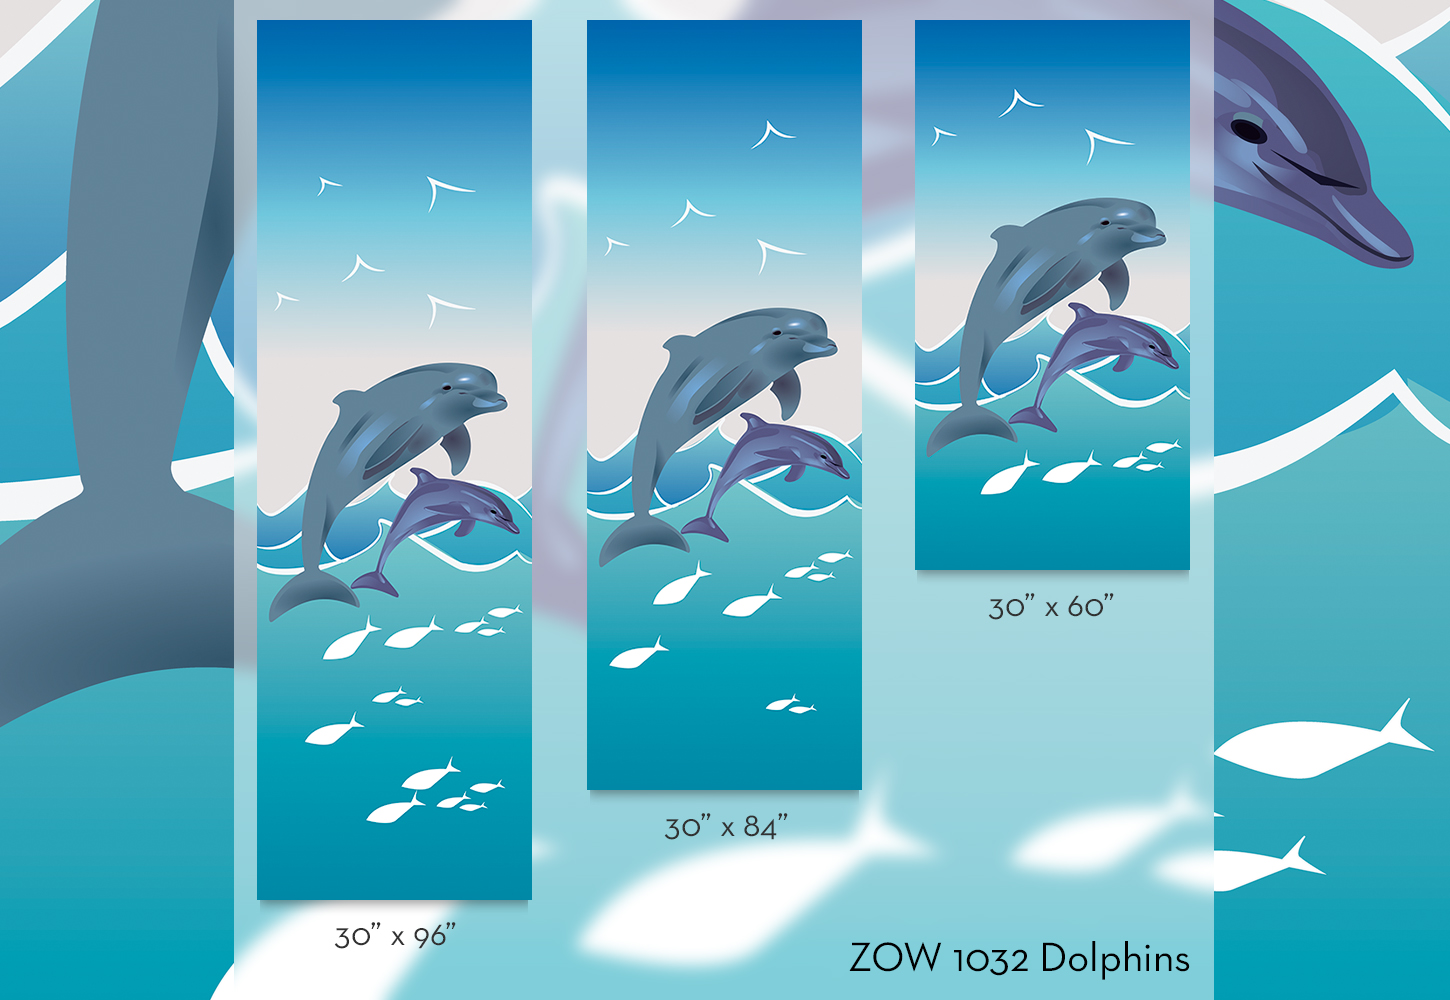 ZOW 1032 Dolphins